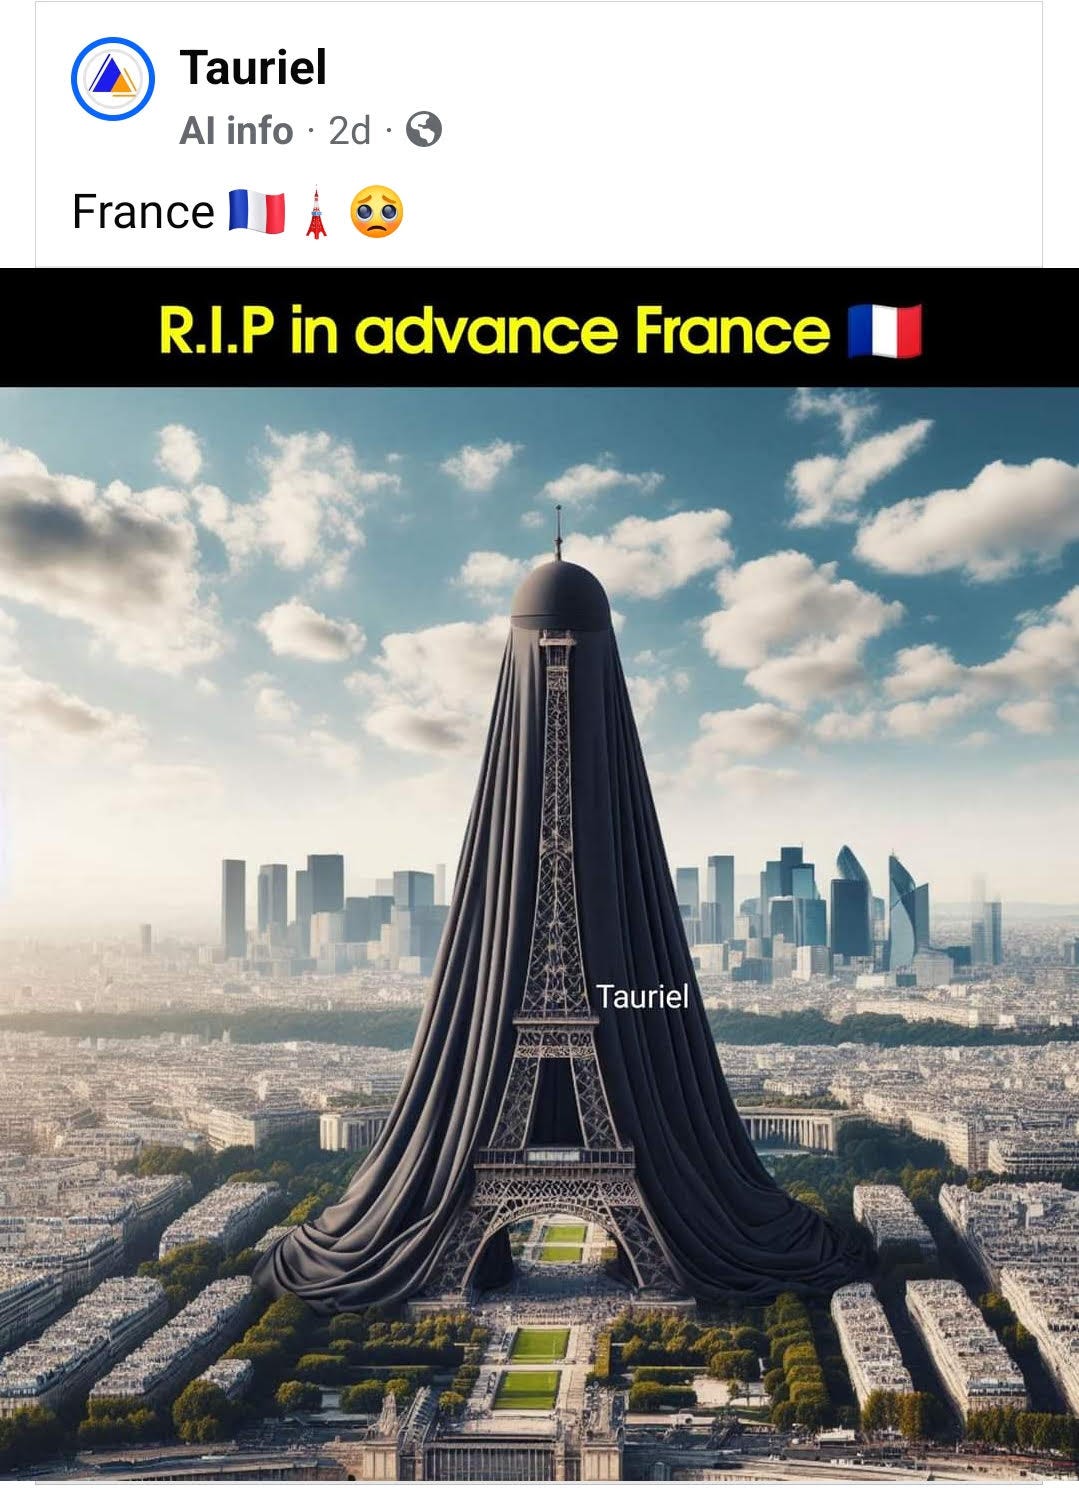 A screenshot of a page (Tauriel) on Facebook with an AI generated image of the Eiffel Tower in Paris covered with a giant Burkha